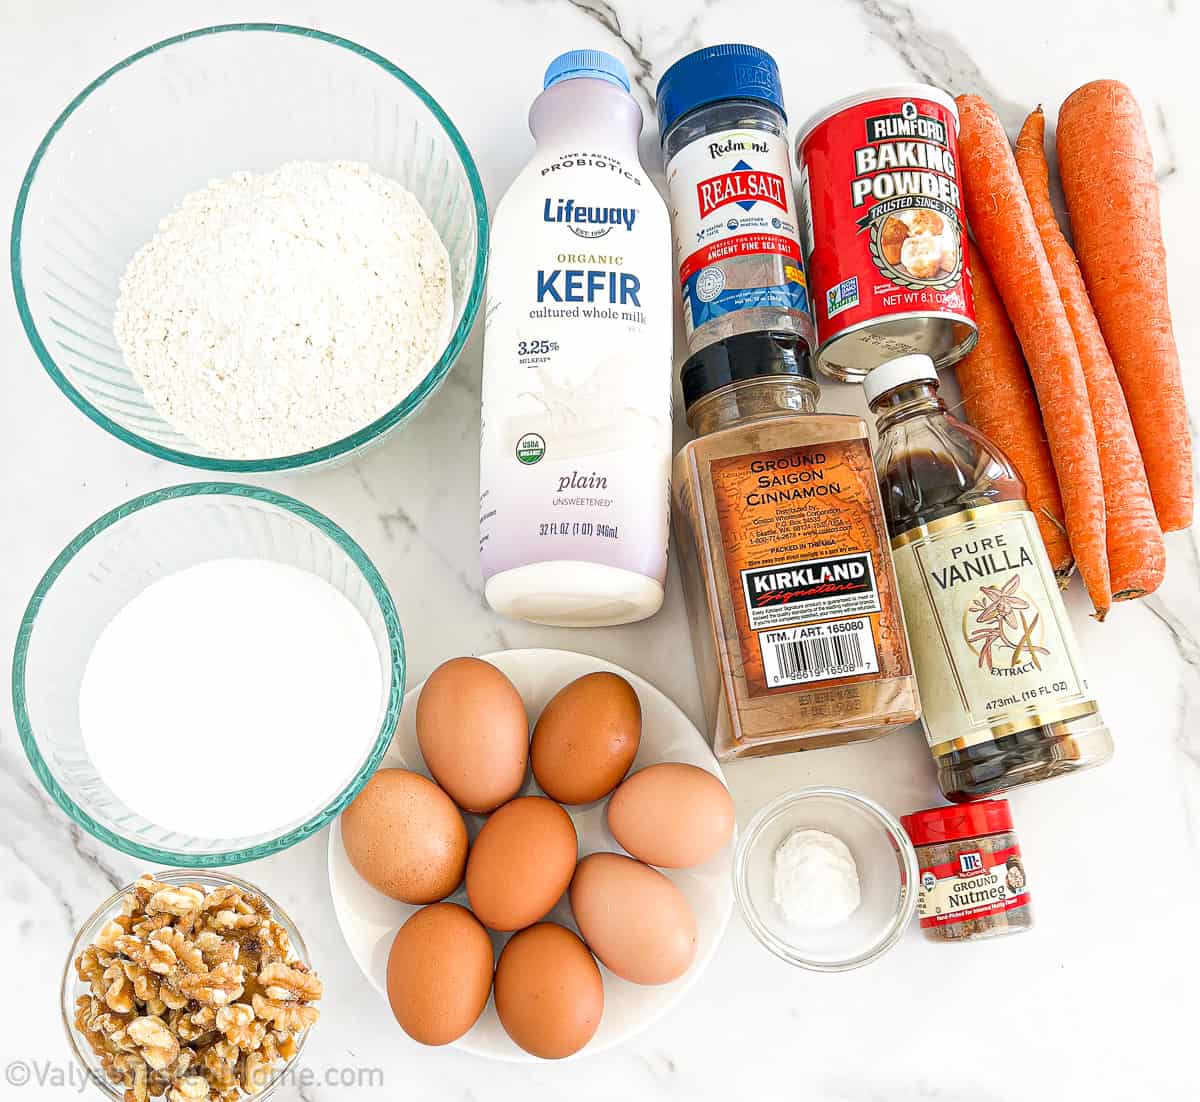 Ingredients on how to make cake batter for the Simple Carrot Walnut Cake Recipe